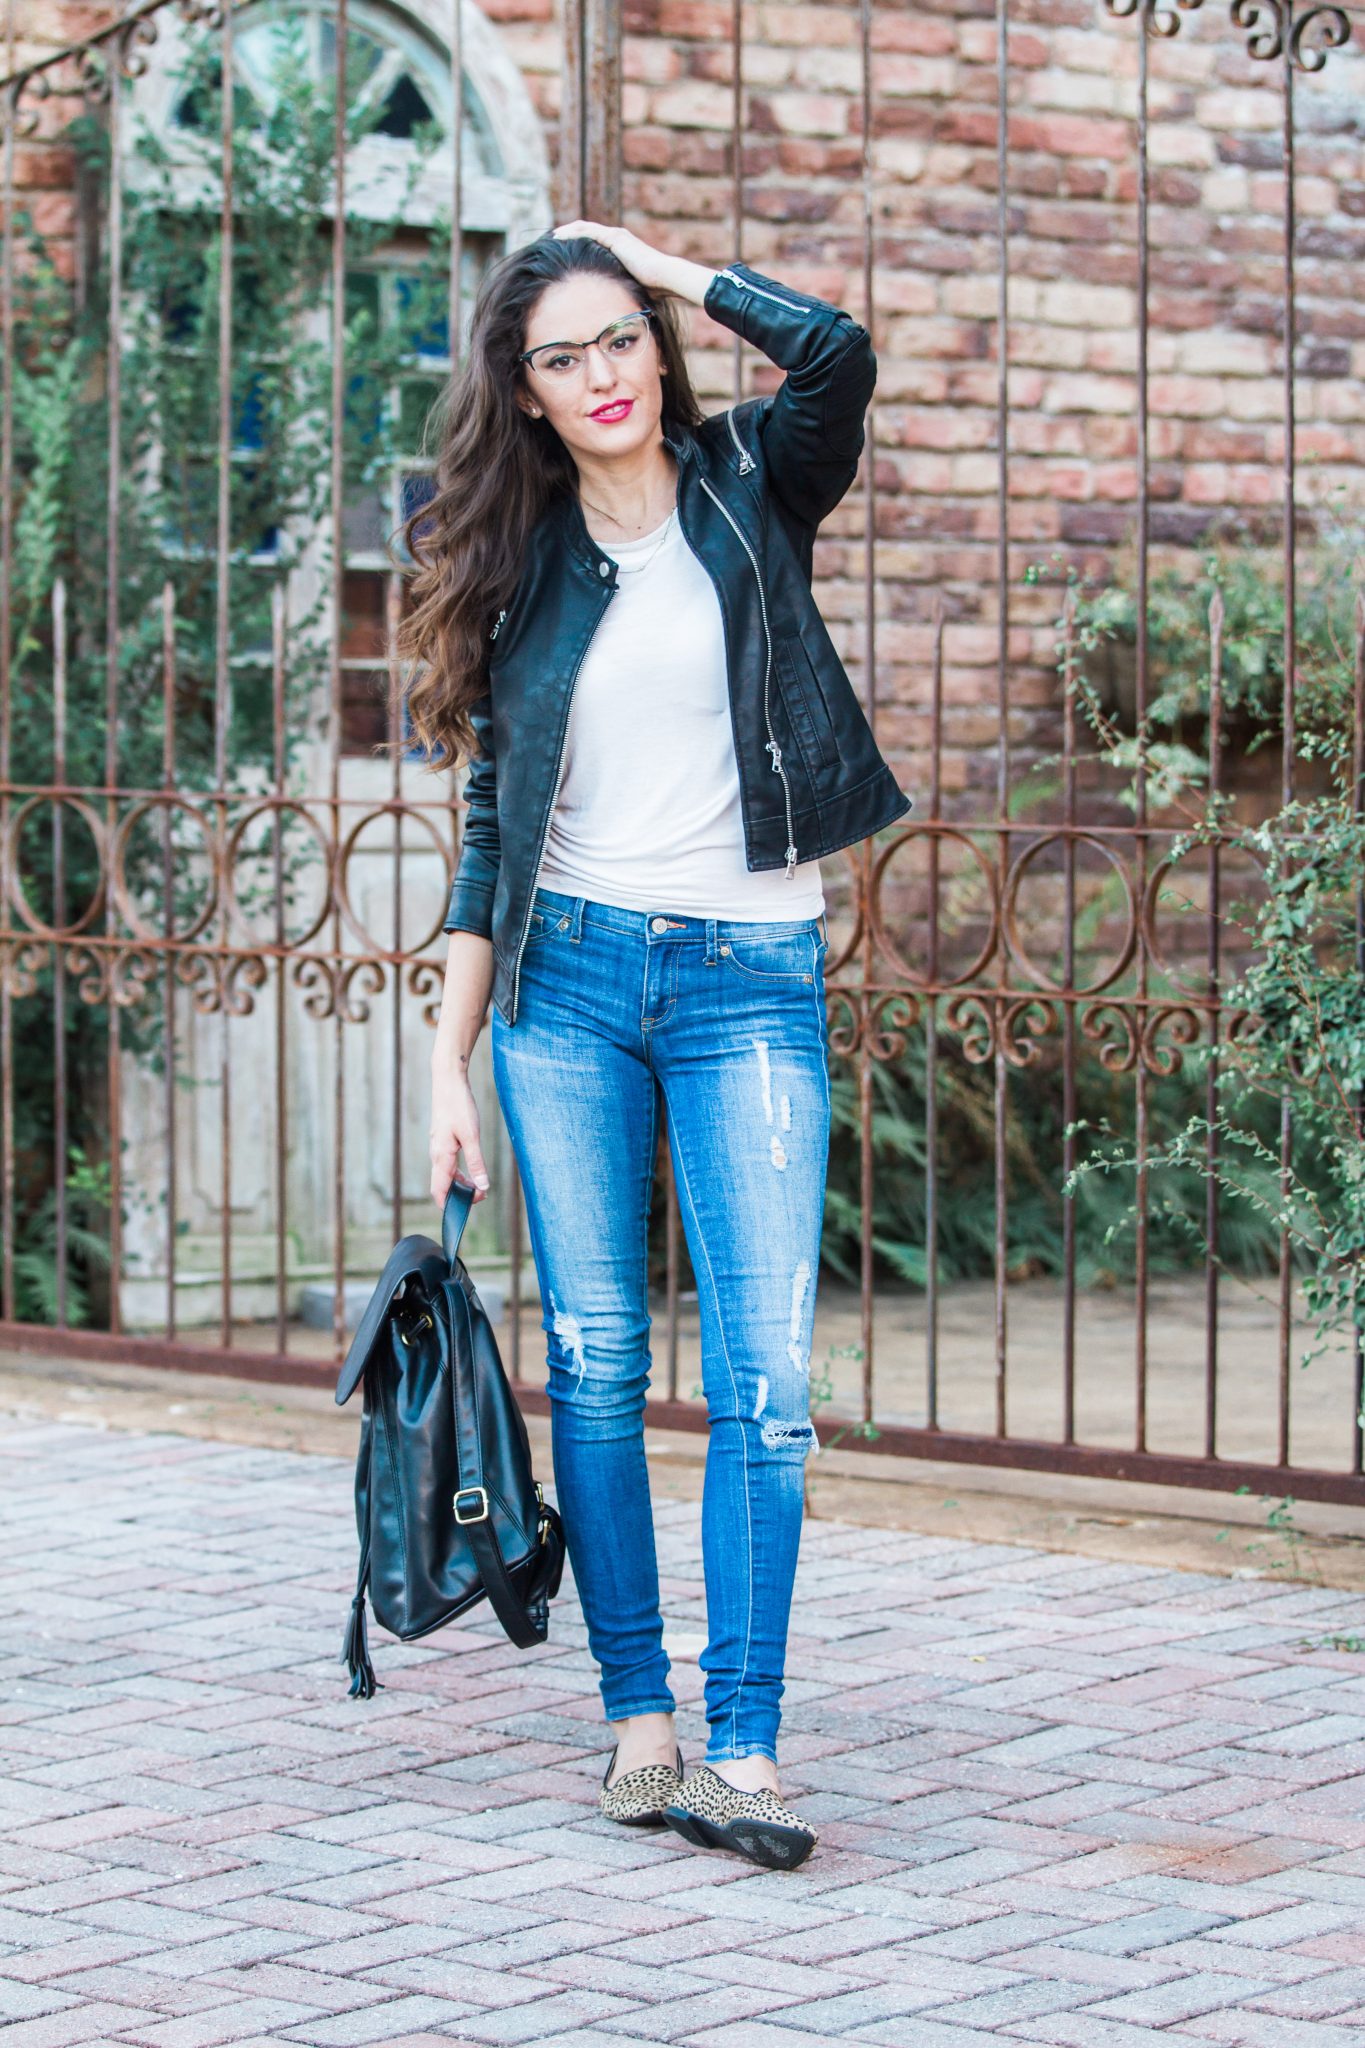 classic white tee and jeans for fall, classic fall style, simple fall style, how to wear a t shirt and jeans, red lipstick